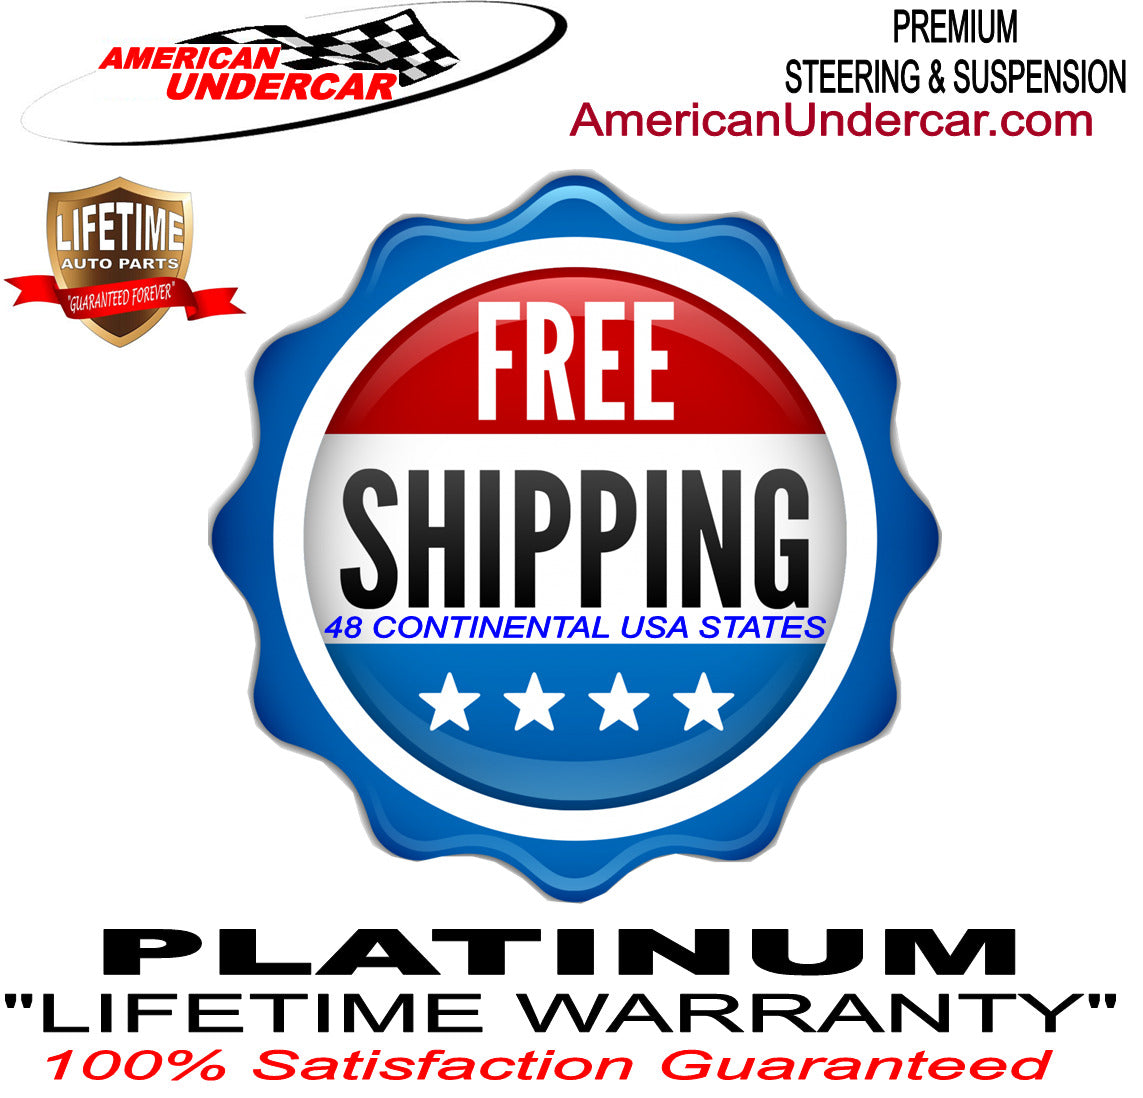 Lifetime Steering and Suspension Kit for 2001-2010 Chevrolet Silverado 3500HD 4x4